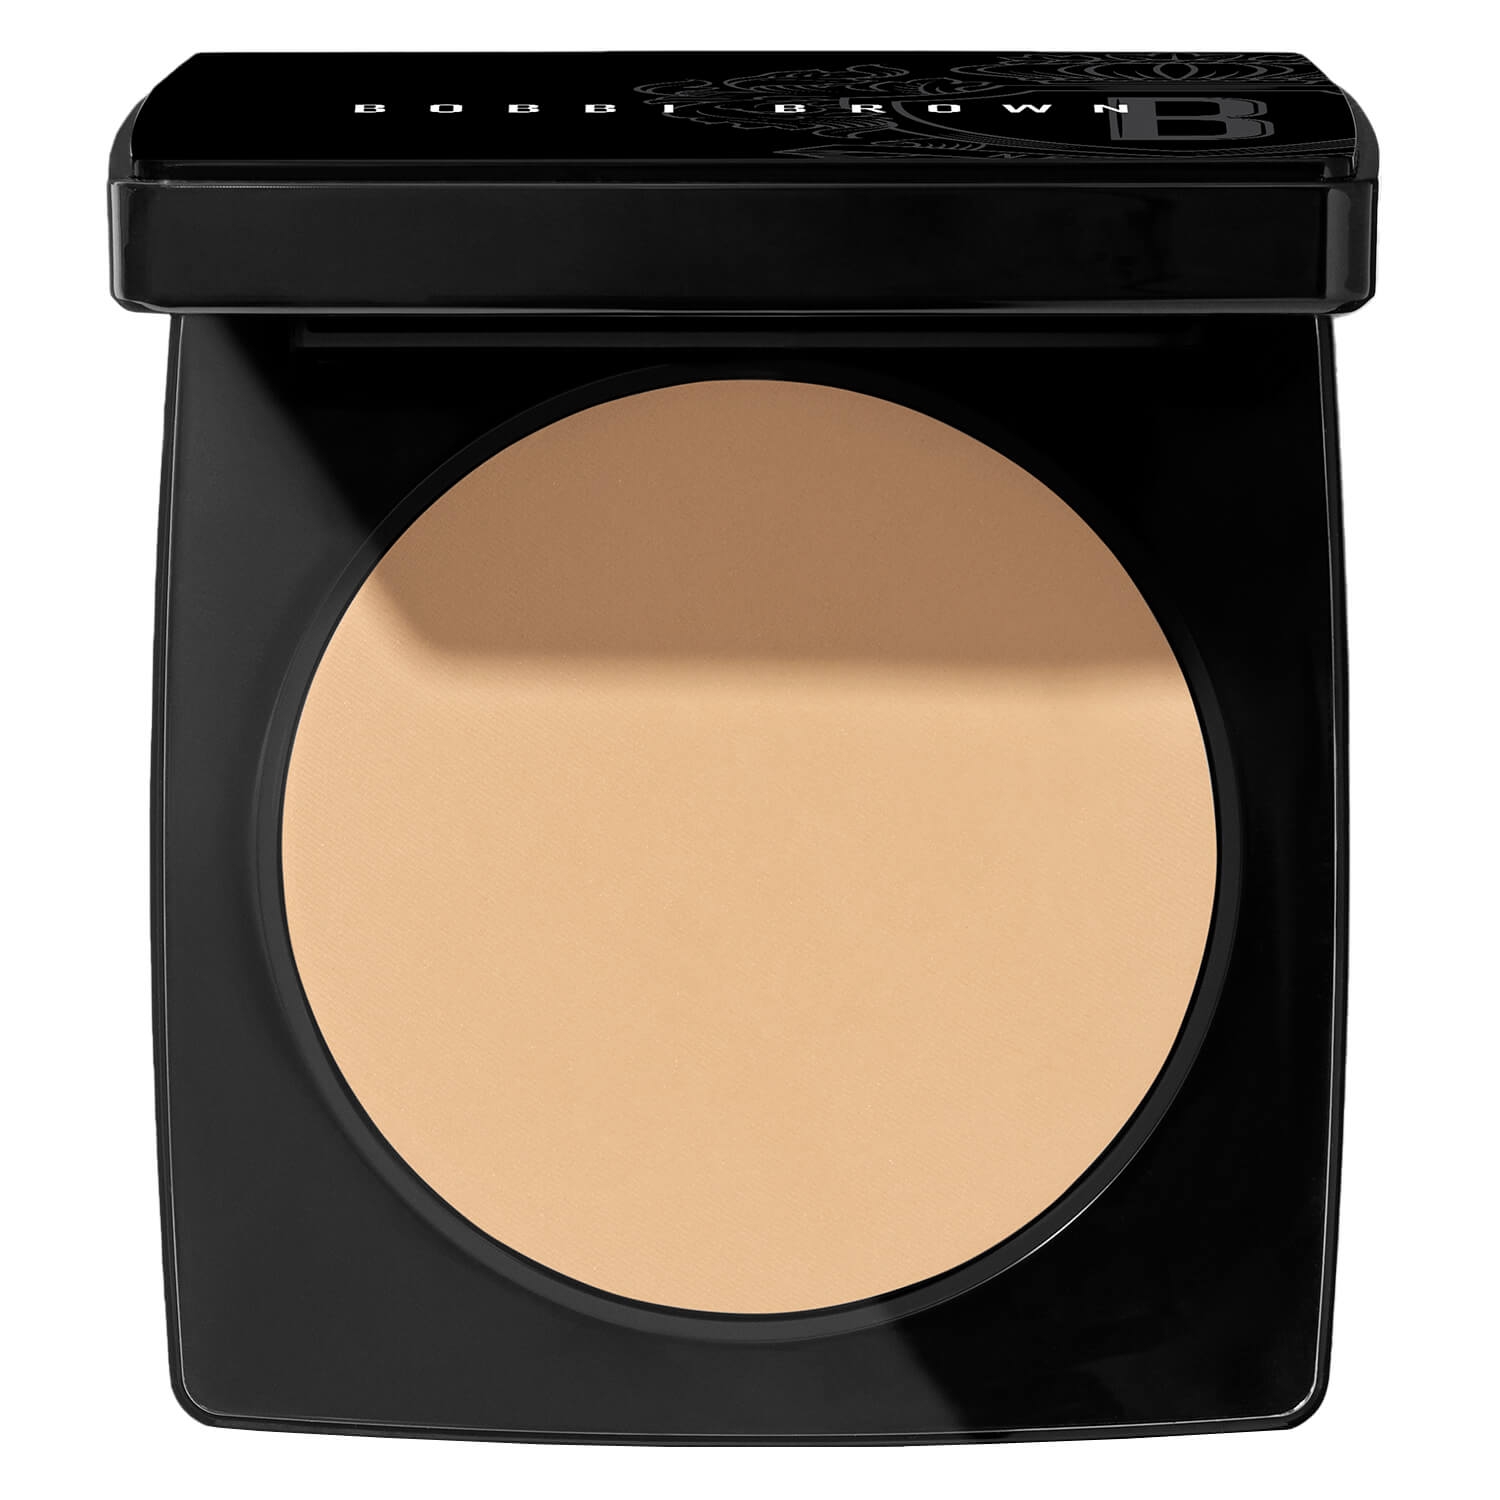 Product image from BB Powder - Sheer Finish Pressed Powder Soft Sand